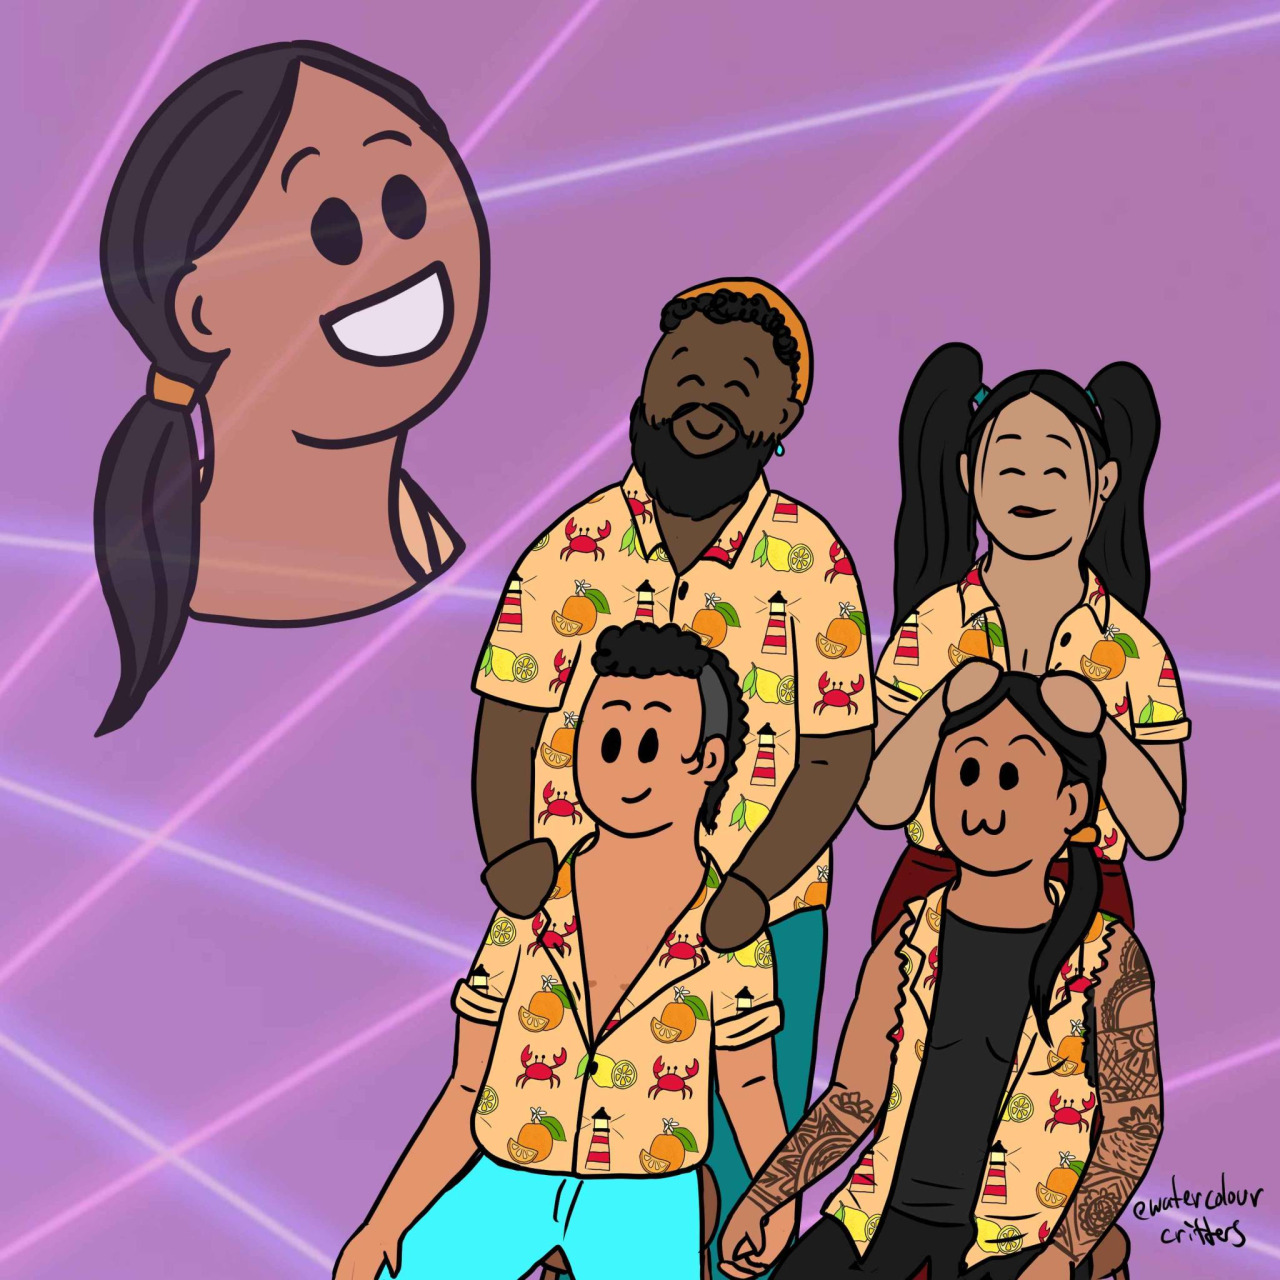 Digital art of Oluwande, Zheng, Jim, and Archie from OFMD drawn in a cartoon style. It is a family portrait, like taken in a cheap photo studio. All four of them wear the same button down shirt that is orange and patterned with crabs, lighthouses, oranges, and lemons - notably, Archie's has the sleeves ripped off, and Jim's is unbuttoned to show top surgery scars. Jim and Archie sit on stools in the front row, and hold each other's hands. Oluwande stands behind Jim, with his hands on their shoulders. Zheng stands behind Archie, with her hands on Archie's head. Floating in the top left corner of the art is a giant, partially see through image of Archie's head, grinning widely. The background is purple and shot through with pink and blue lasers.